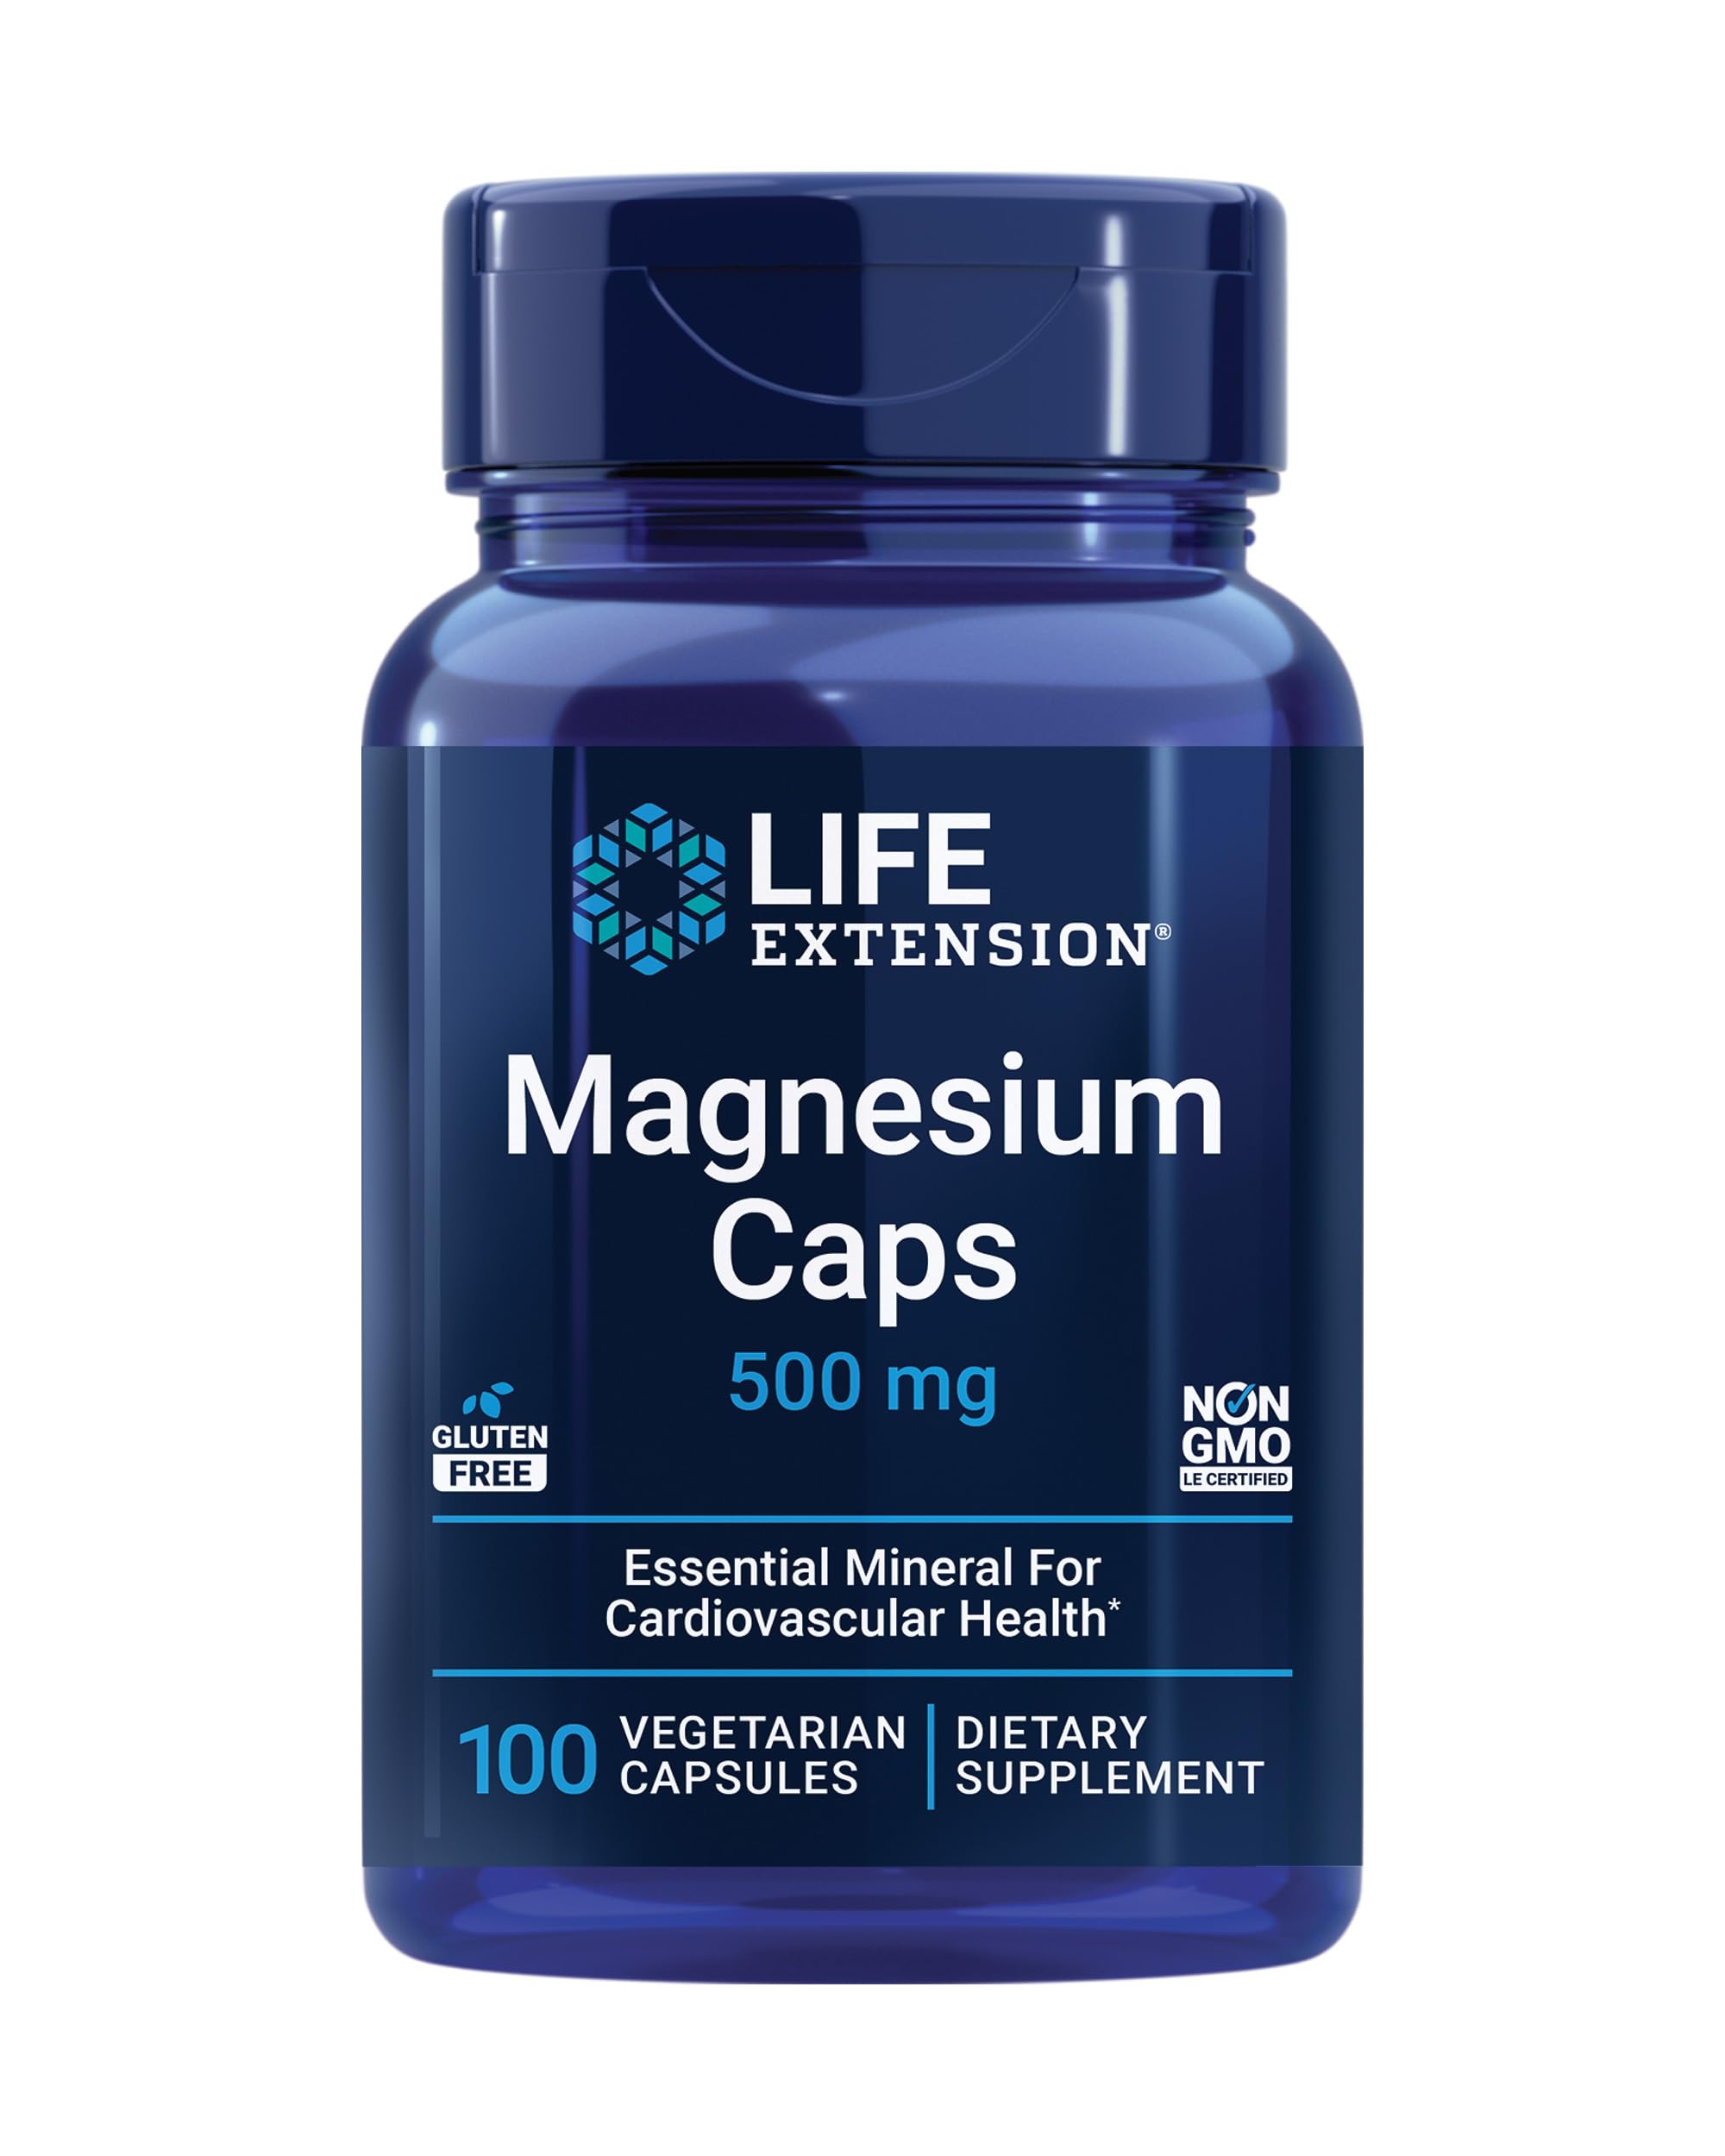 Life Extension Two-Per-Day High Potency Multi-Vitamin & Mineral Supplement & Magnesium Caps, 500 mg, Magnesium Oxide, Citrate, Succinate